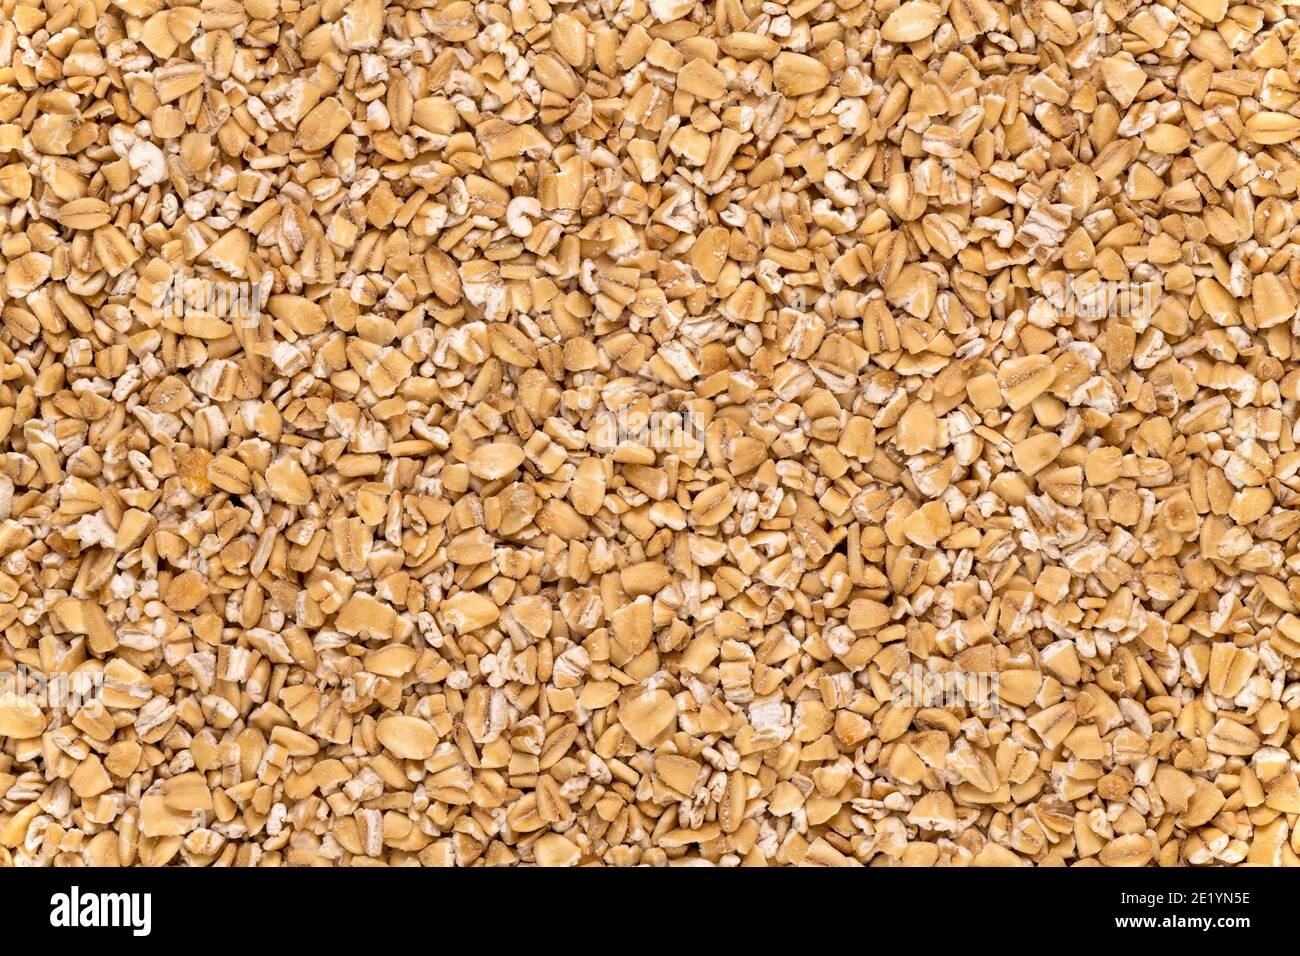 Macro of steel-cut oats, or Irish oats, background and texture. Stock Photo